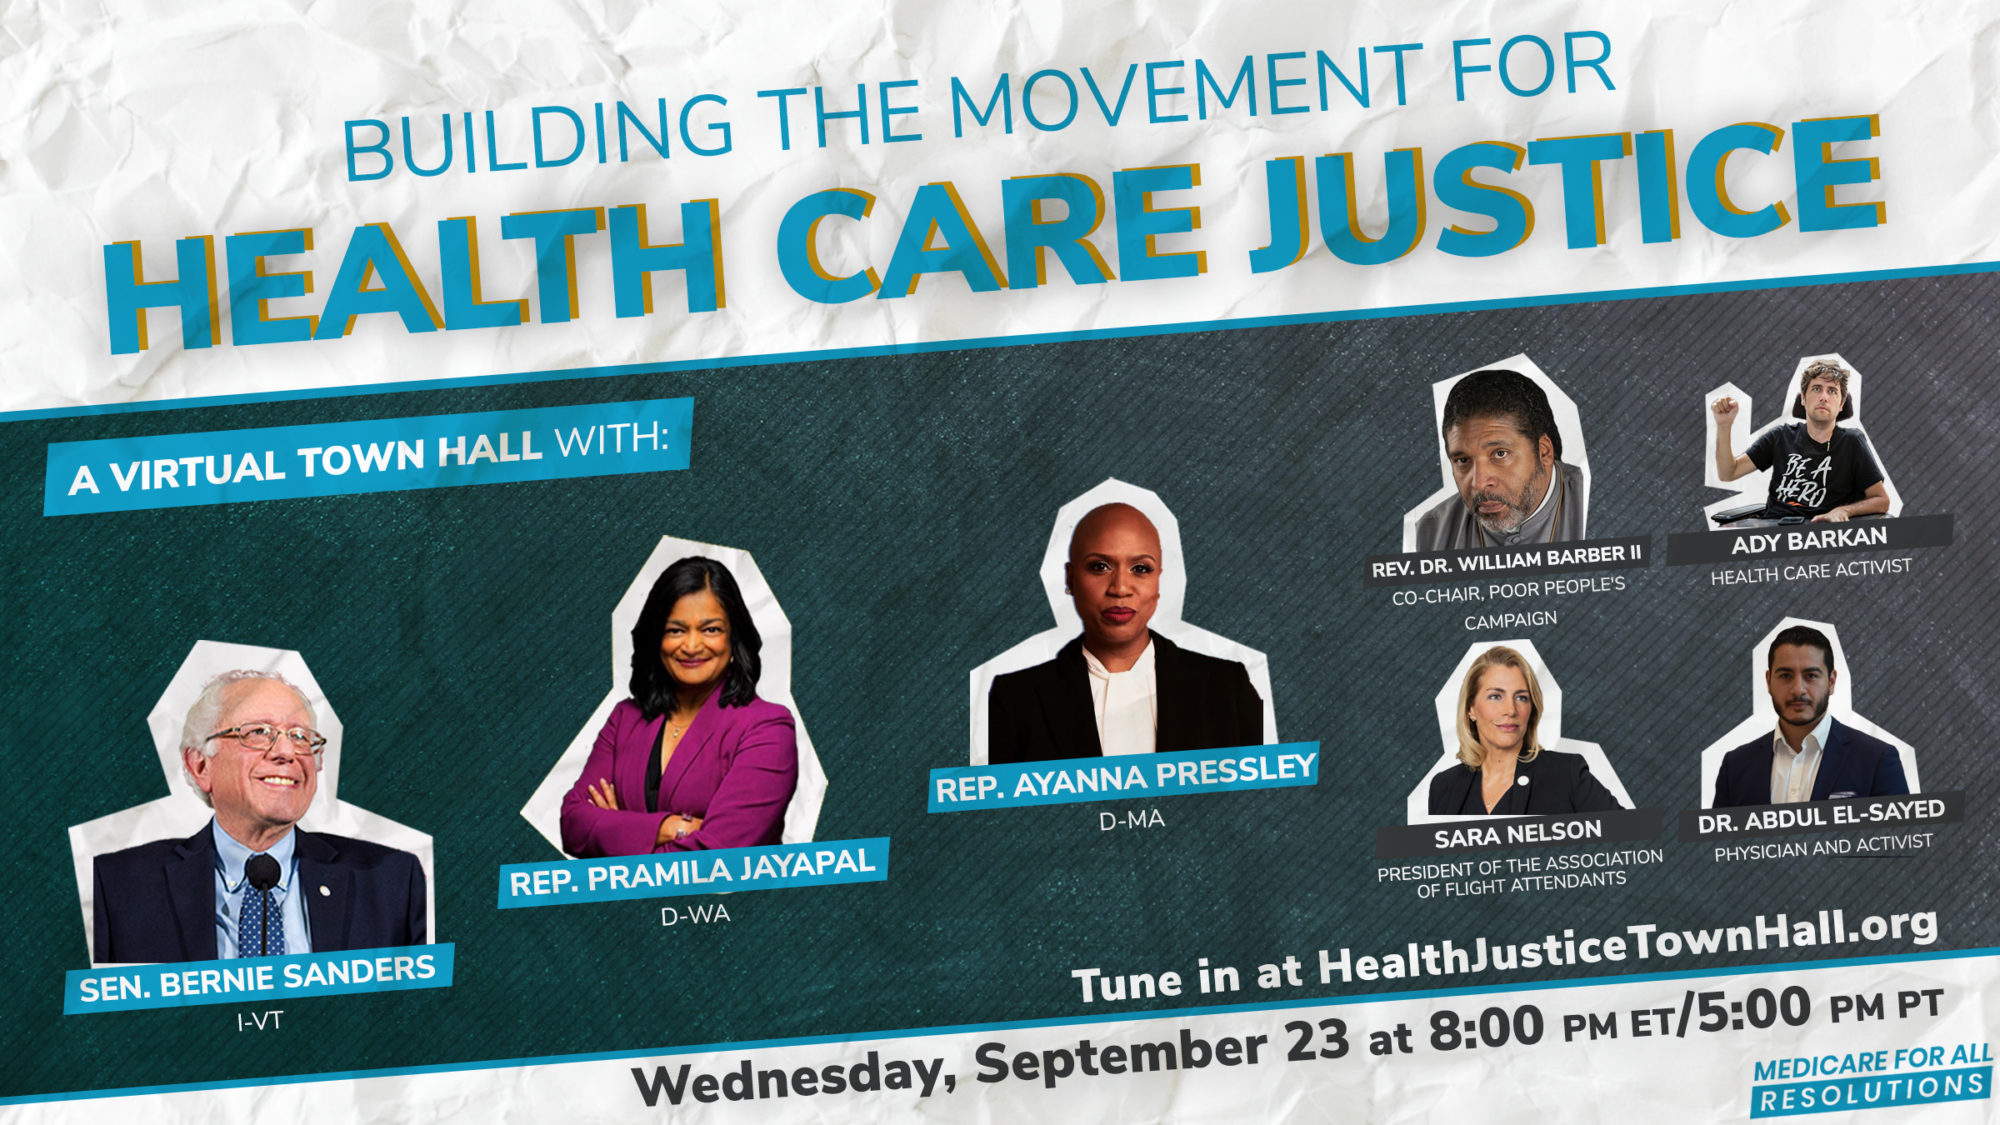 Health Care Justice Town Hall